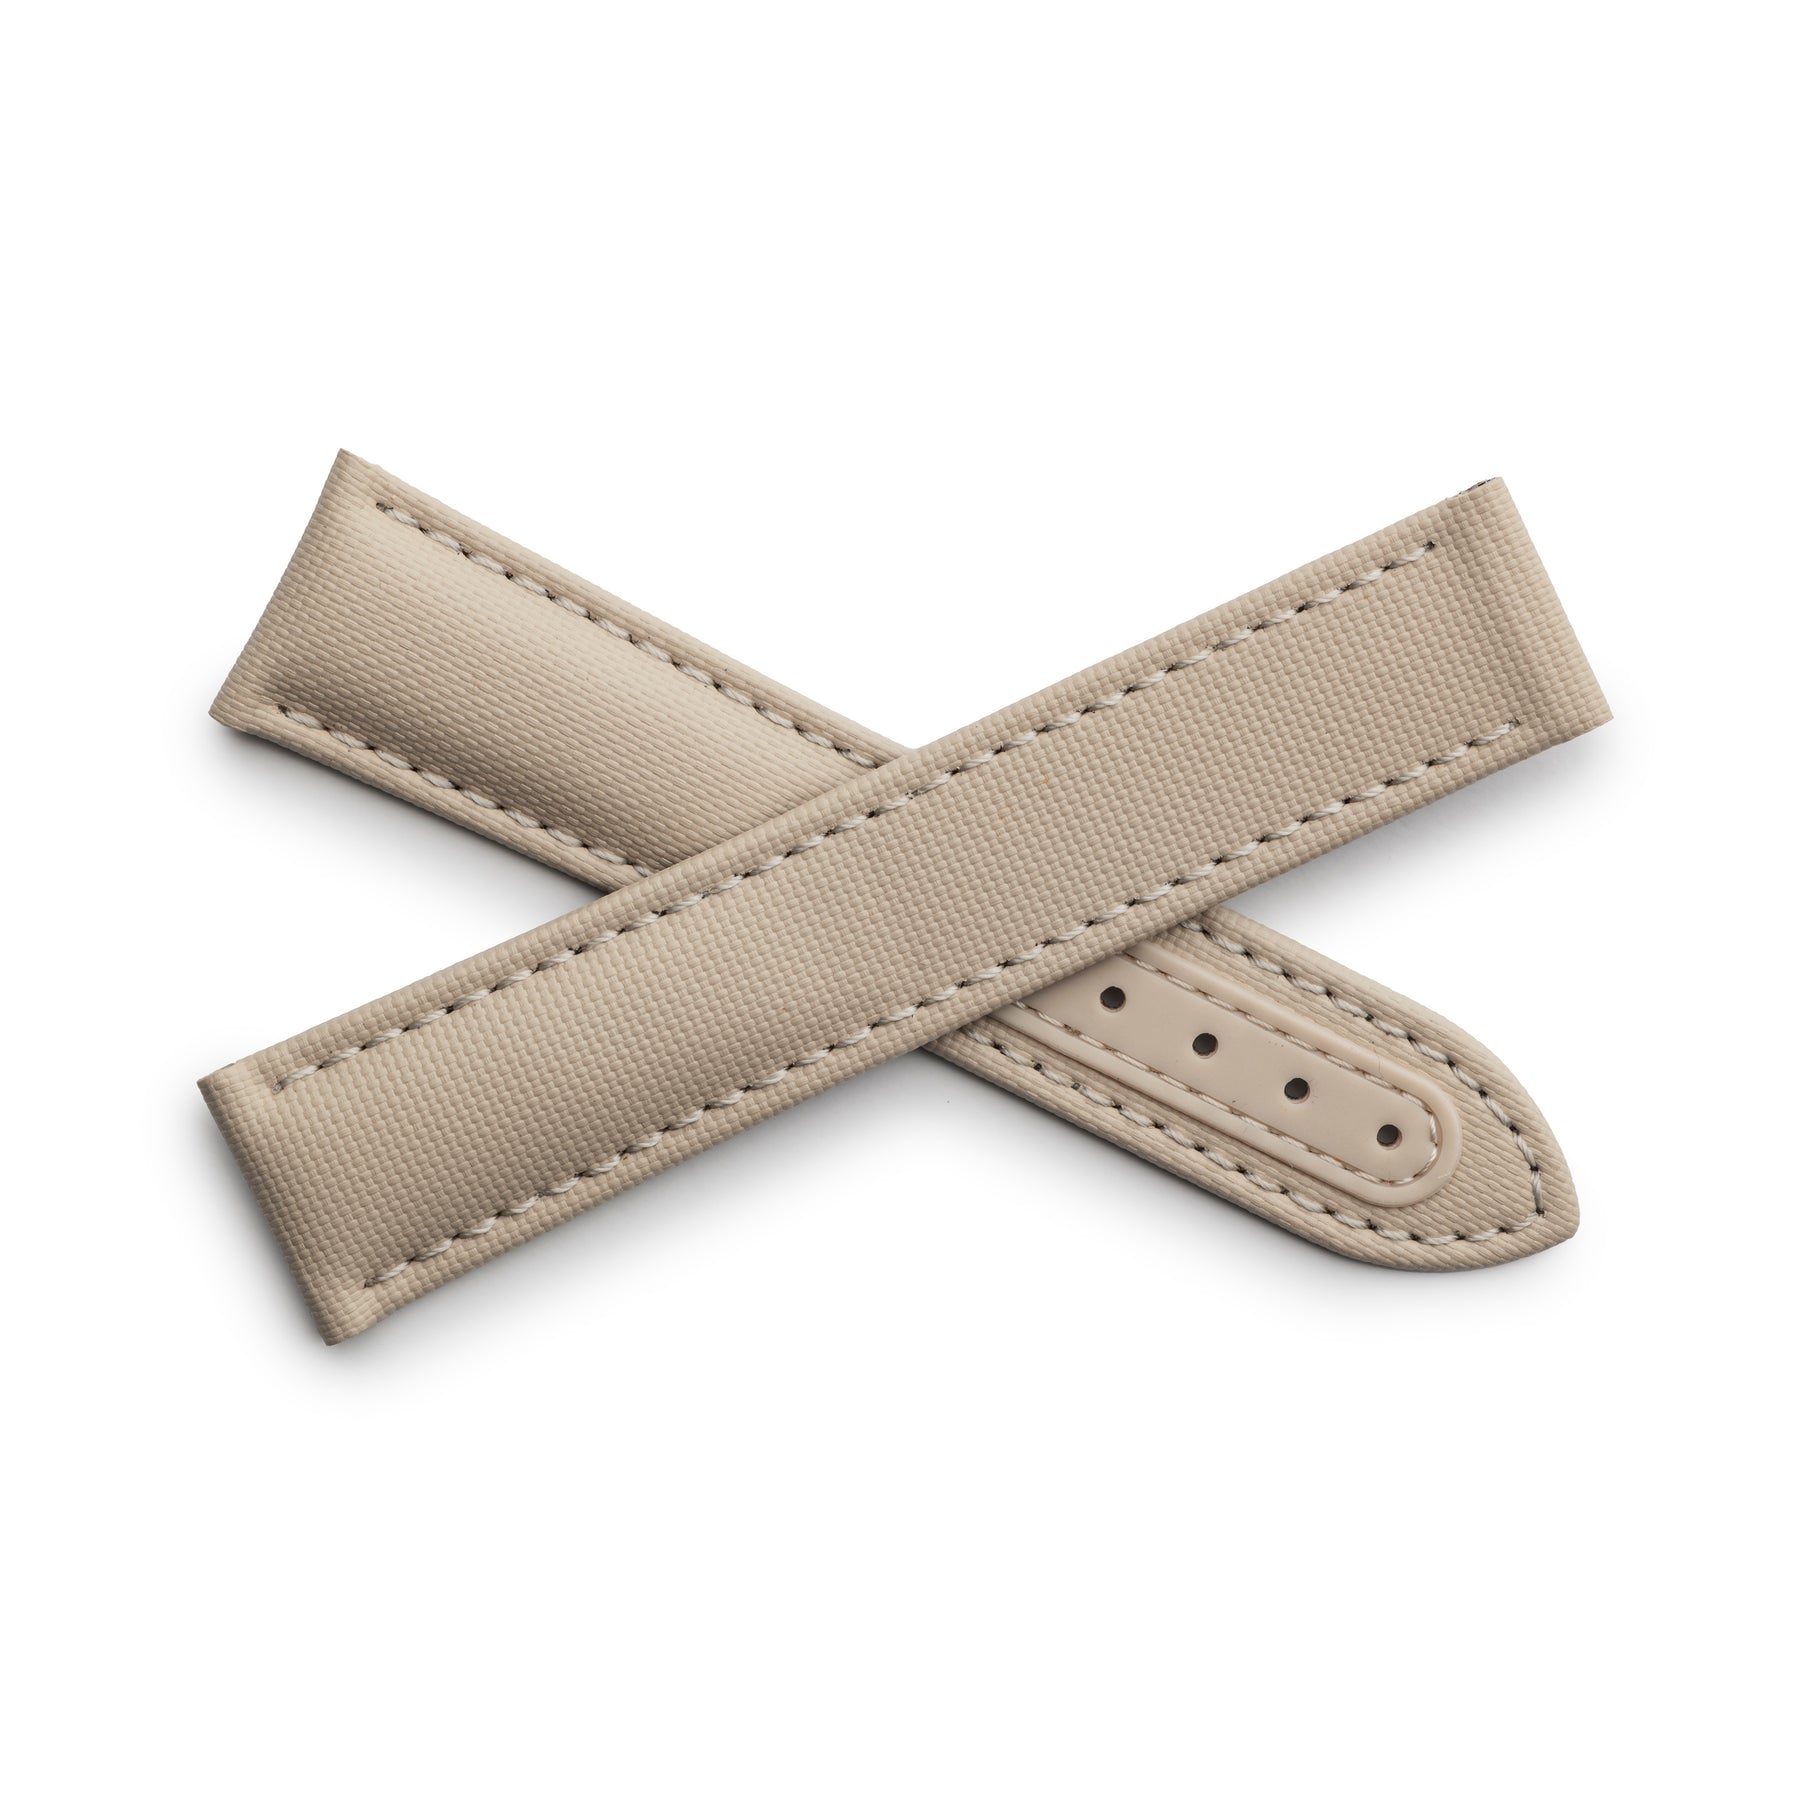 Loop-less Sand Beige Sailcloth Watch Strap with White Stitching